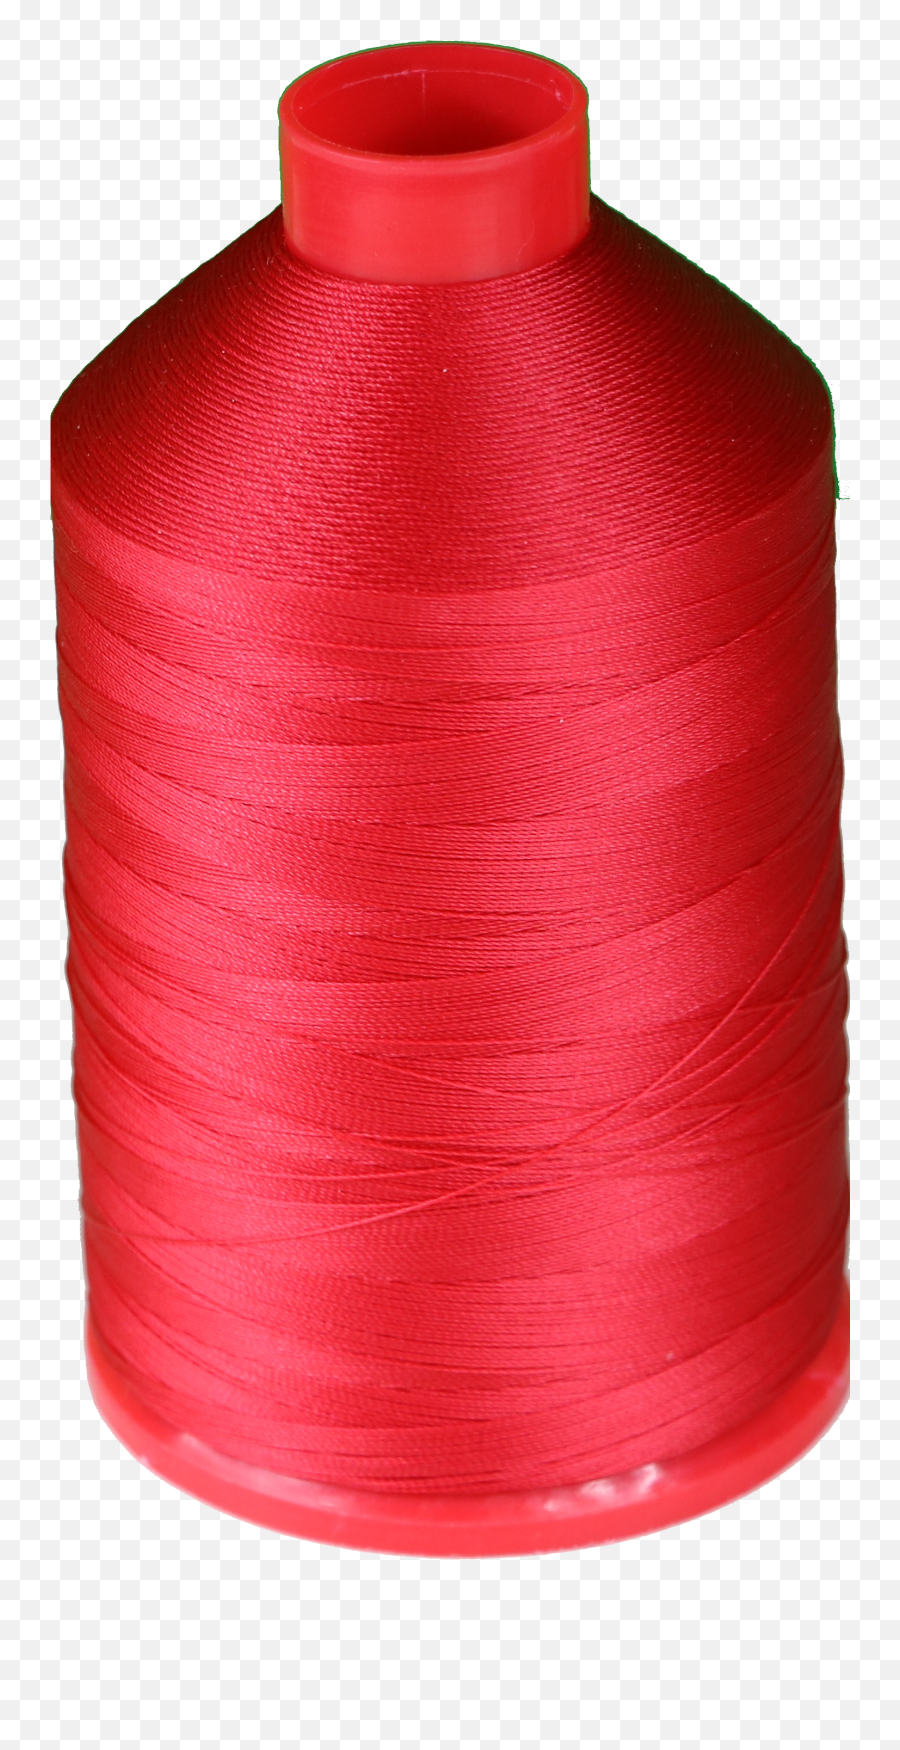 Download Hd Thread Spool Png Transparent Image - Nicepngcom Red Nylon Thread,Thread Png